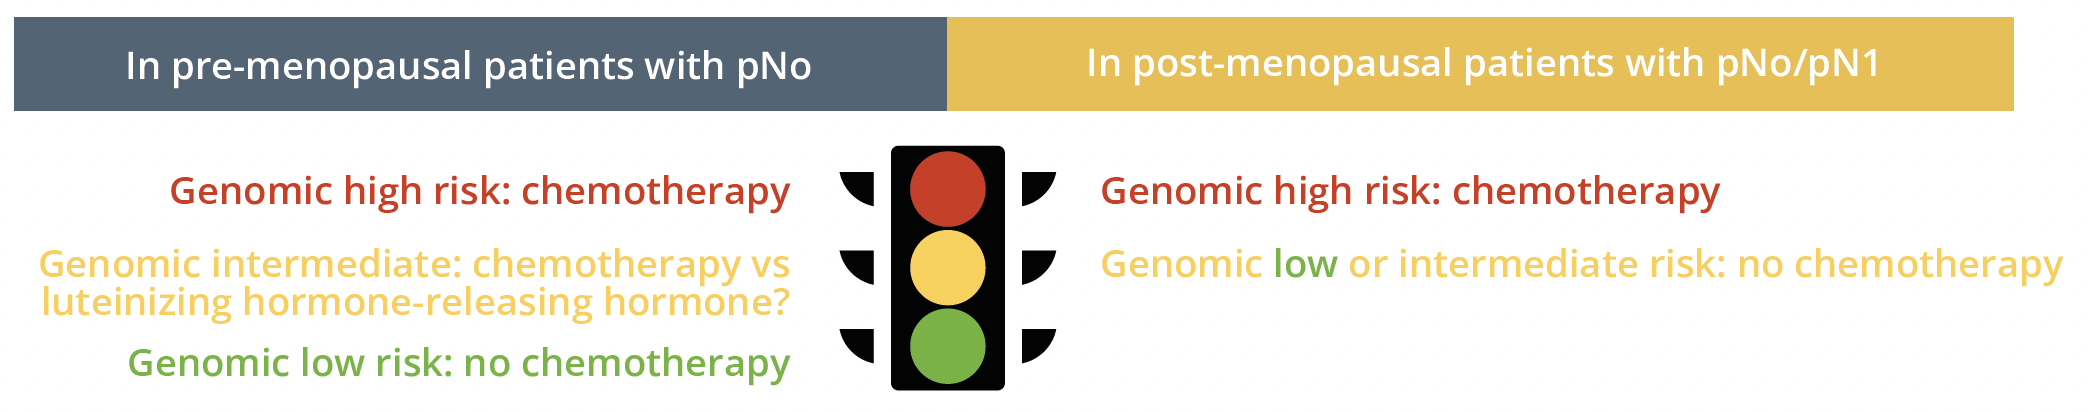 genomic testing can produce a traffic light system to guide practitioners on chemotherapy use in pre- and post-menopausal patients.